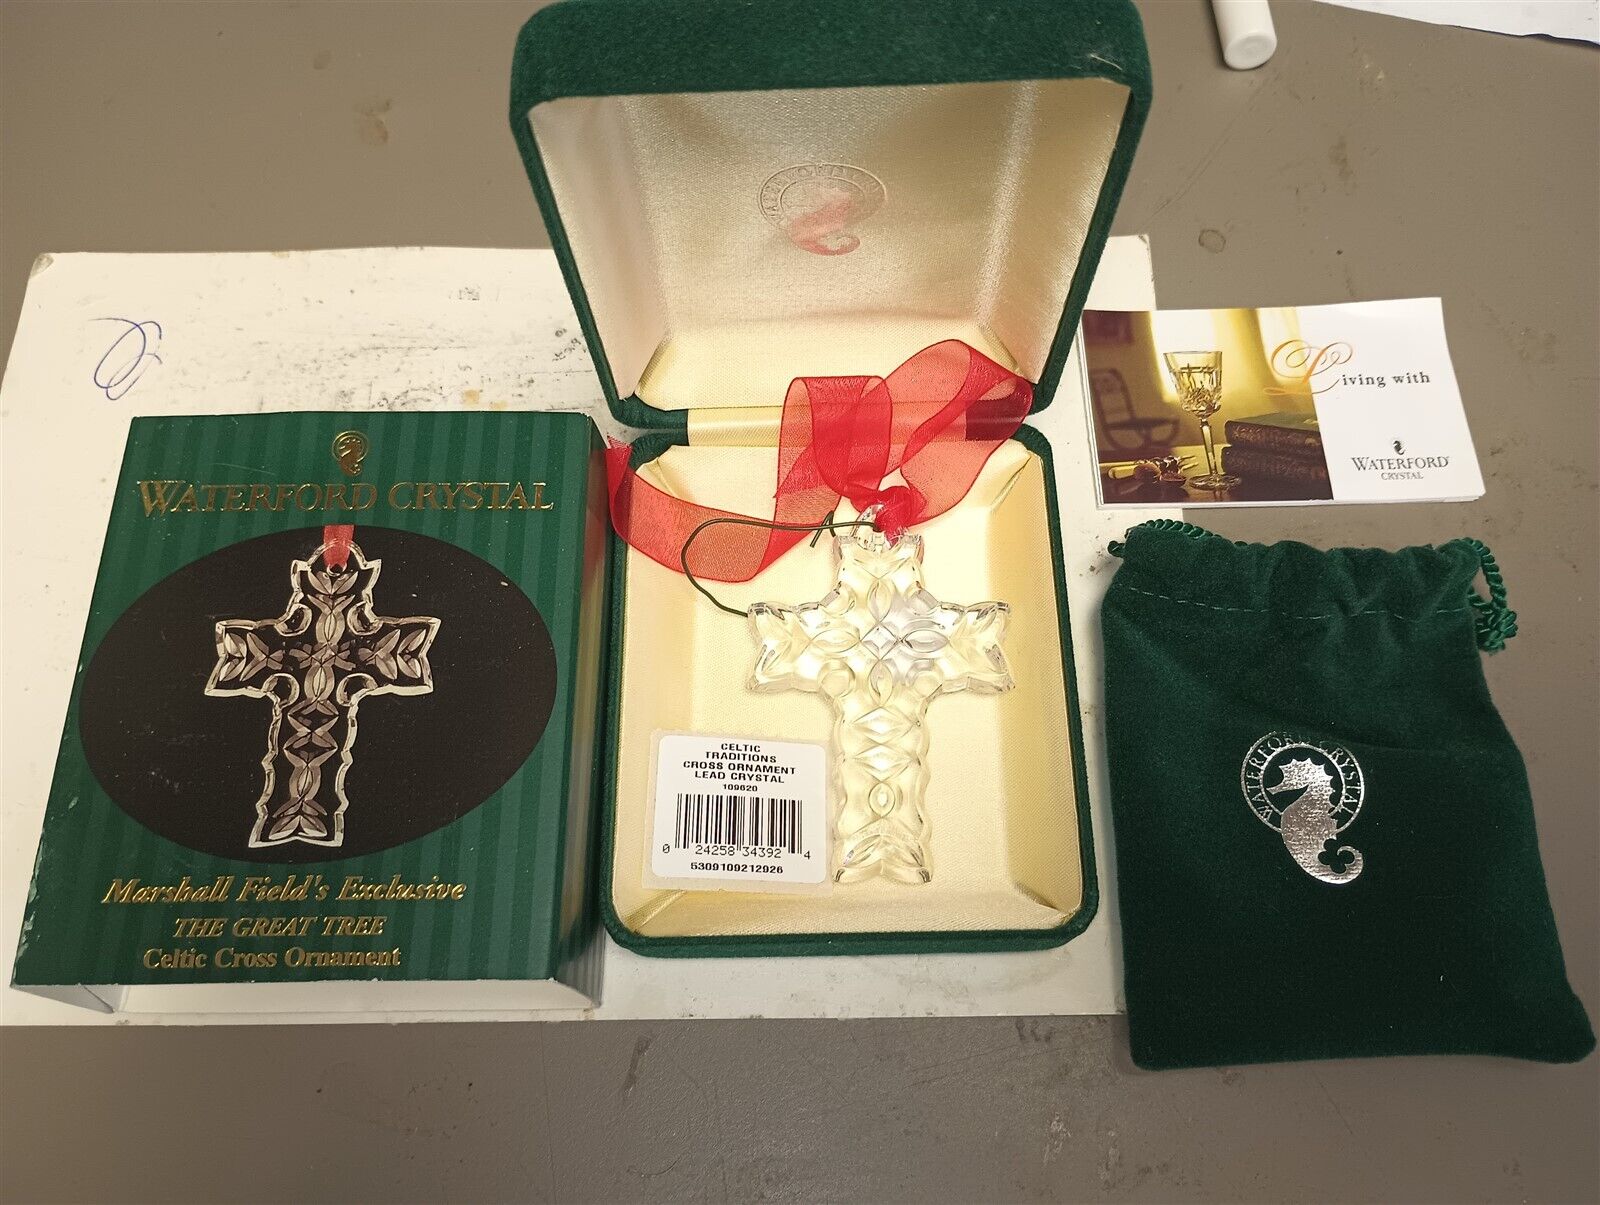 Waterford Crystal MARSHALL FIELD'S EXCLUSIVE- SIGNED - CELTIC CROSS ORNAMENT HTF